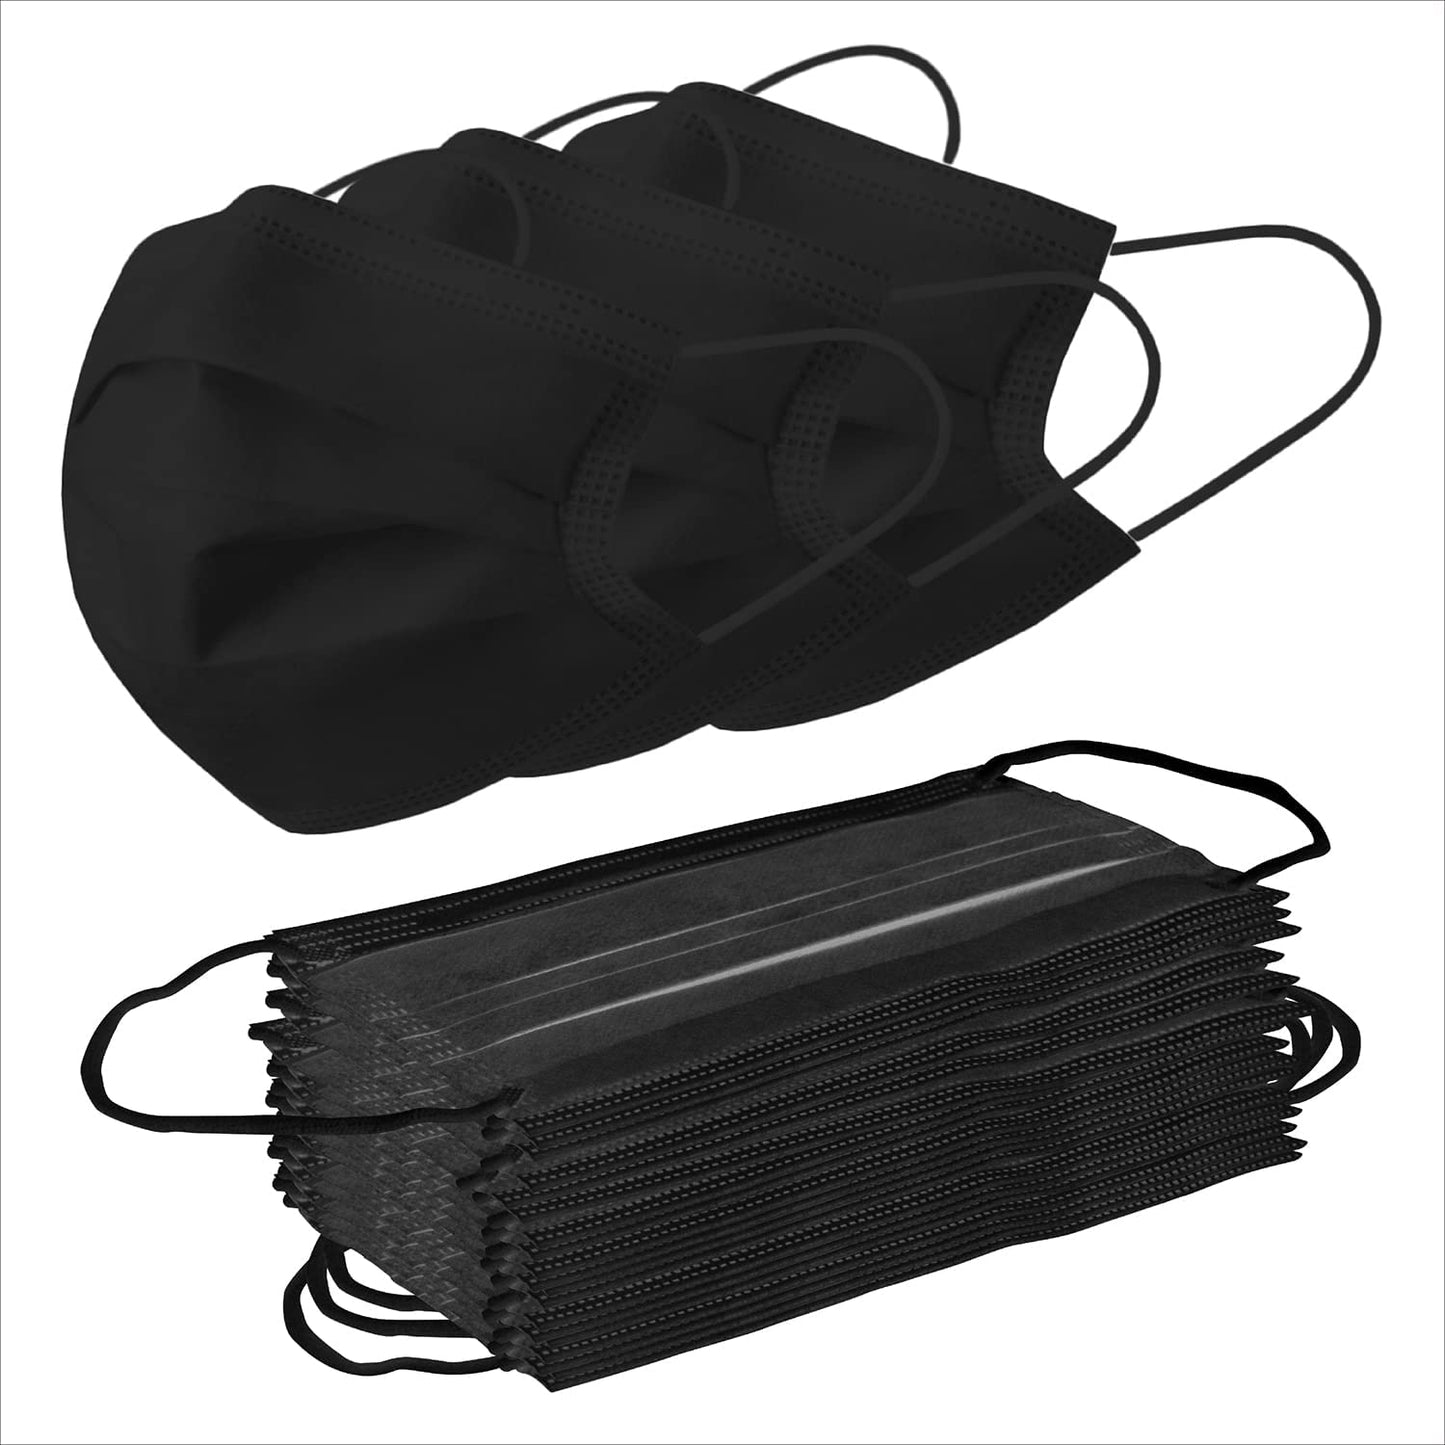 [1000-Pack] BLACK Liberty Masks | Made in USA | 3 Ply Disposable Face Masks | Adjustable Nose Wire | Breathable Face Covering | Lightweight | Soft Elastic Ear Loops